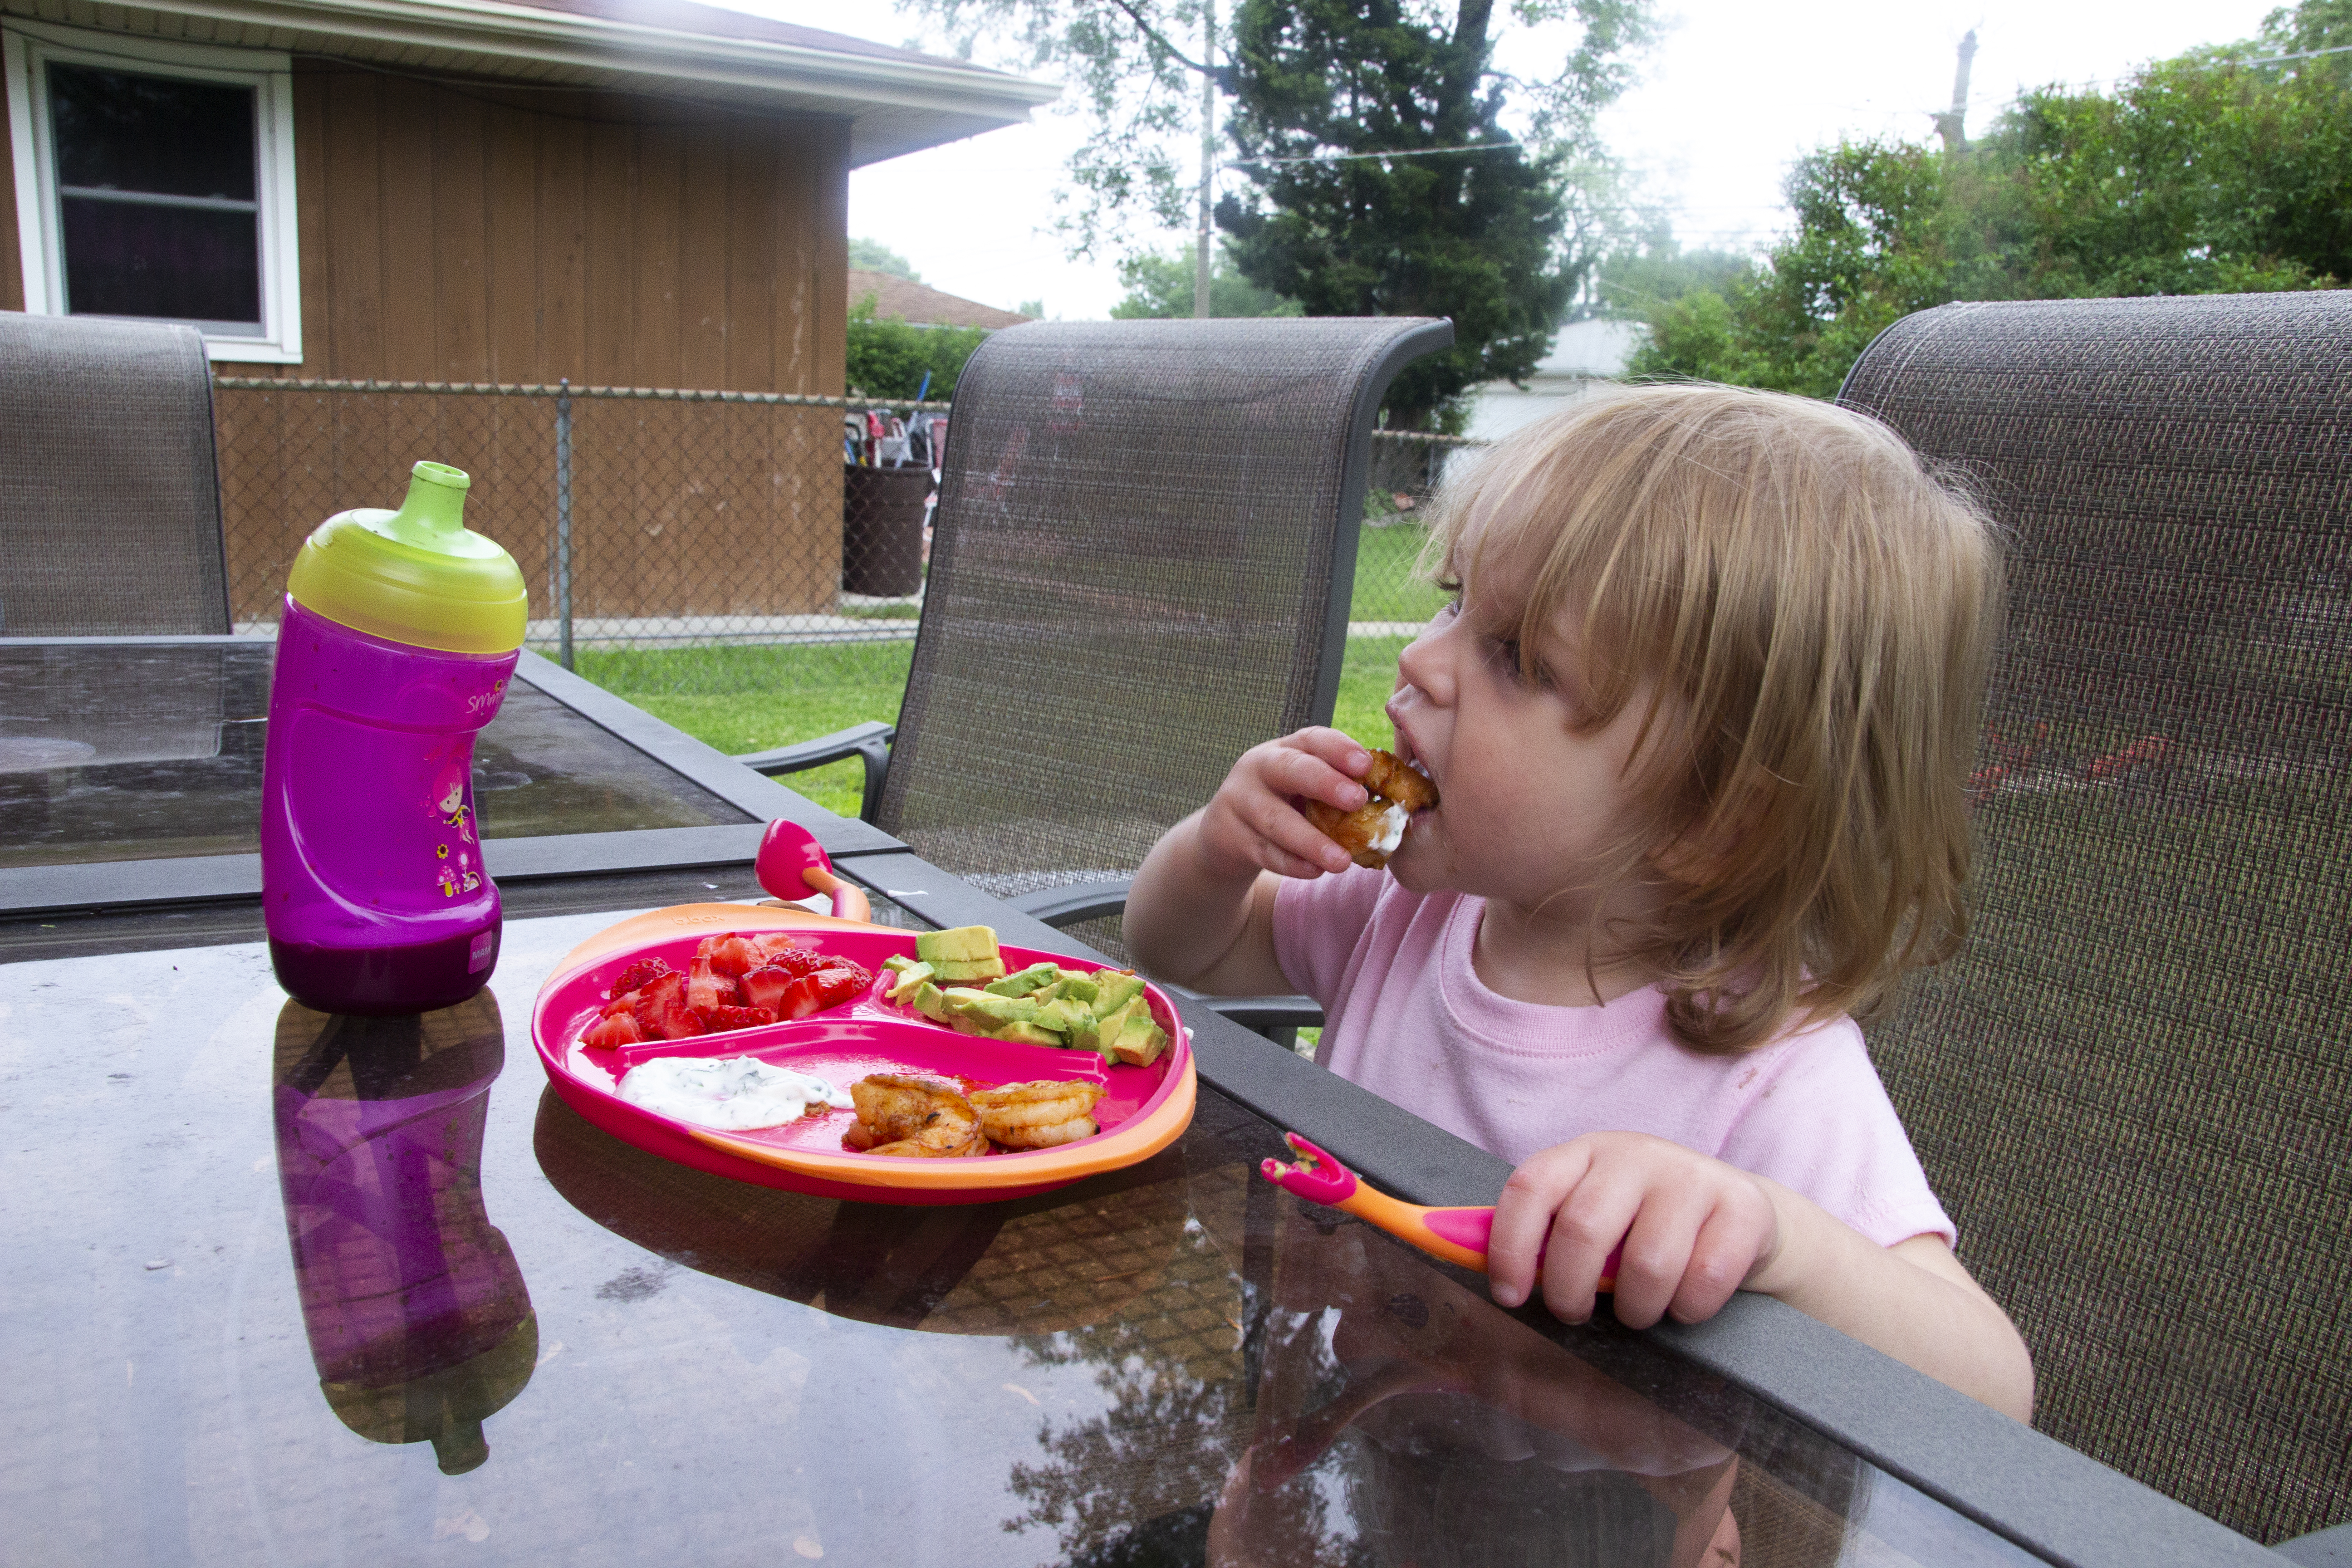 5 Fun Things for Summer at Home: Toddler Edition